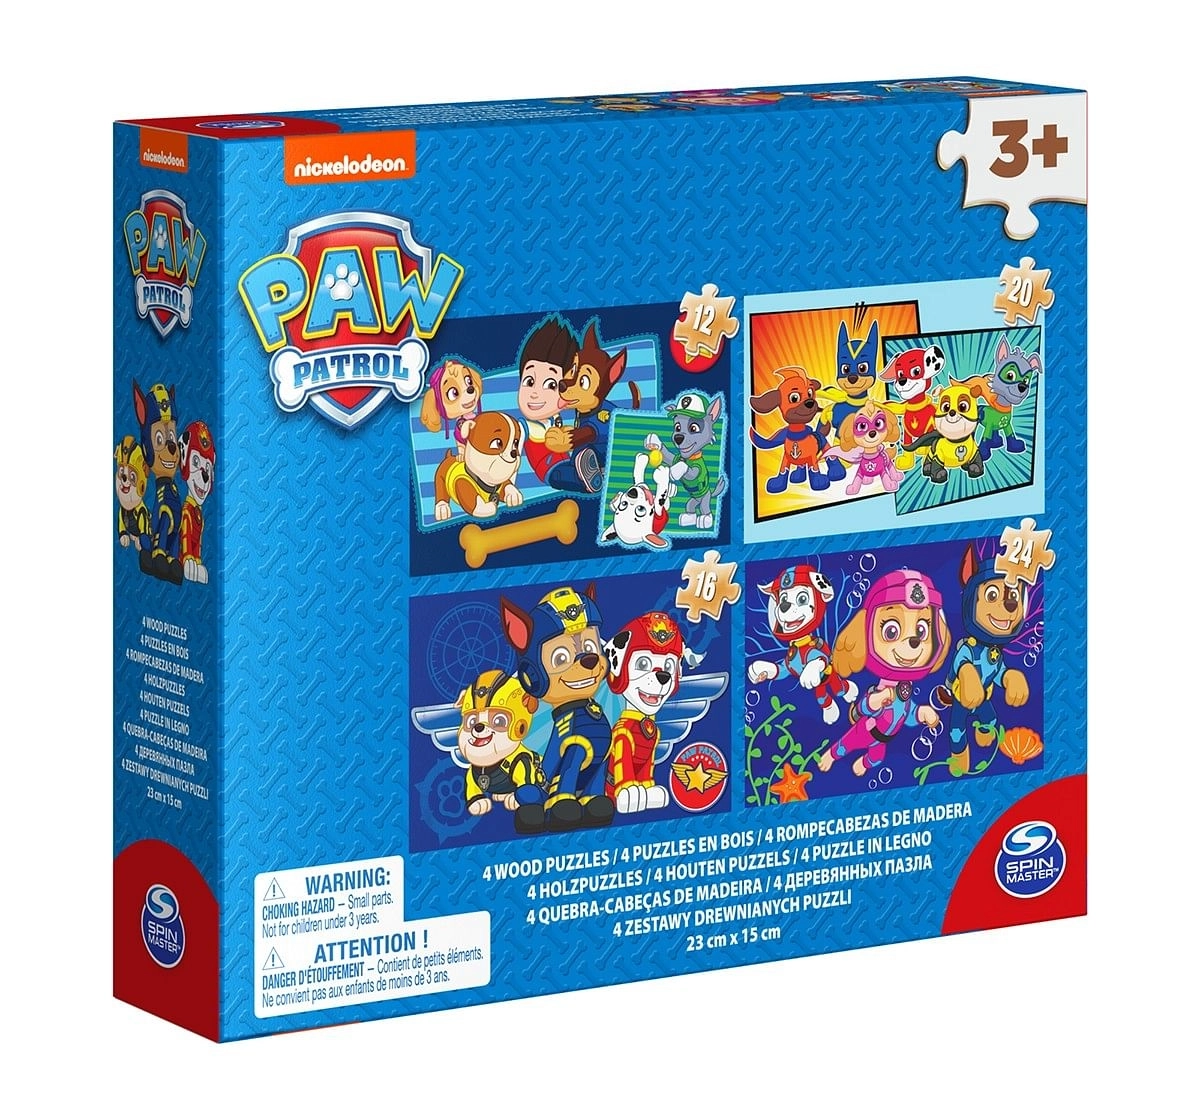 Cardinal Games Paw Patrol Wood Puzzle  Quirky Soft Toys for Kids age 3Y+ - 19 Cm 